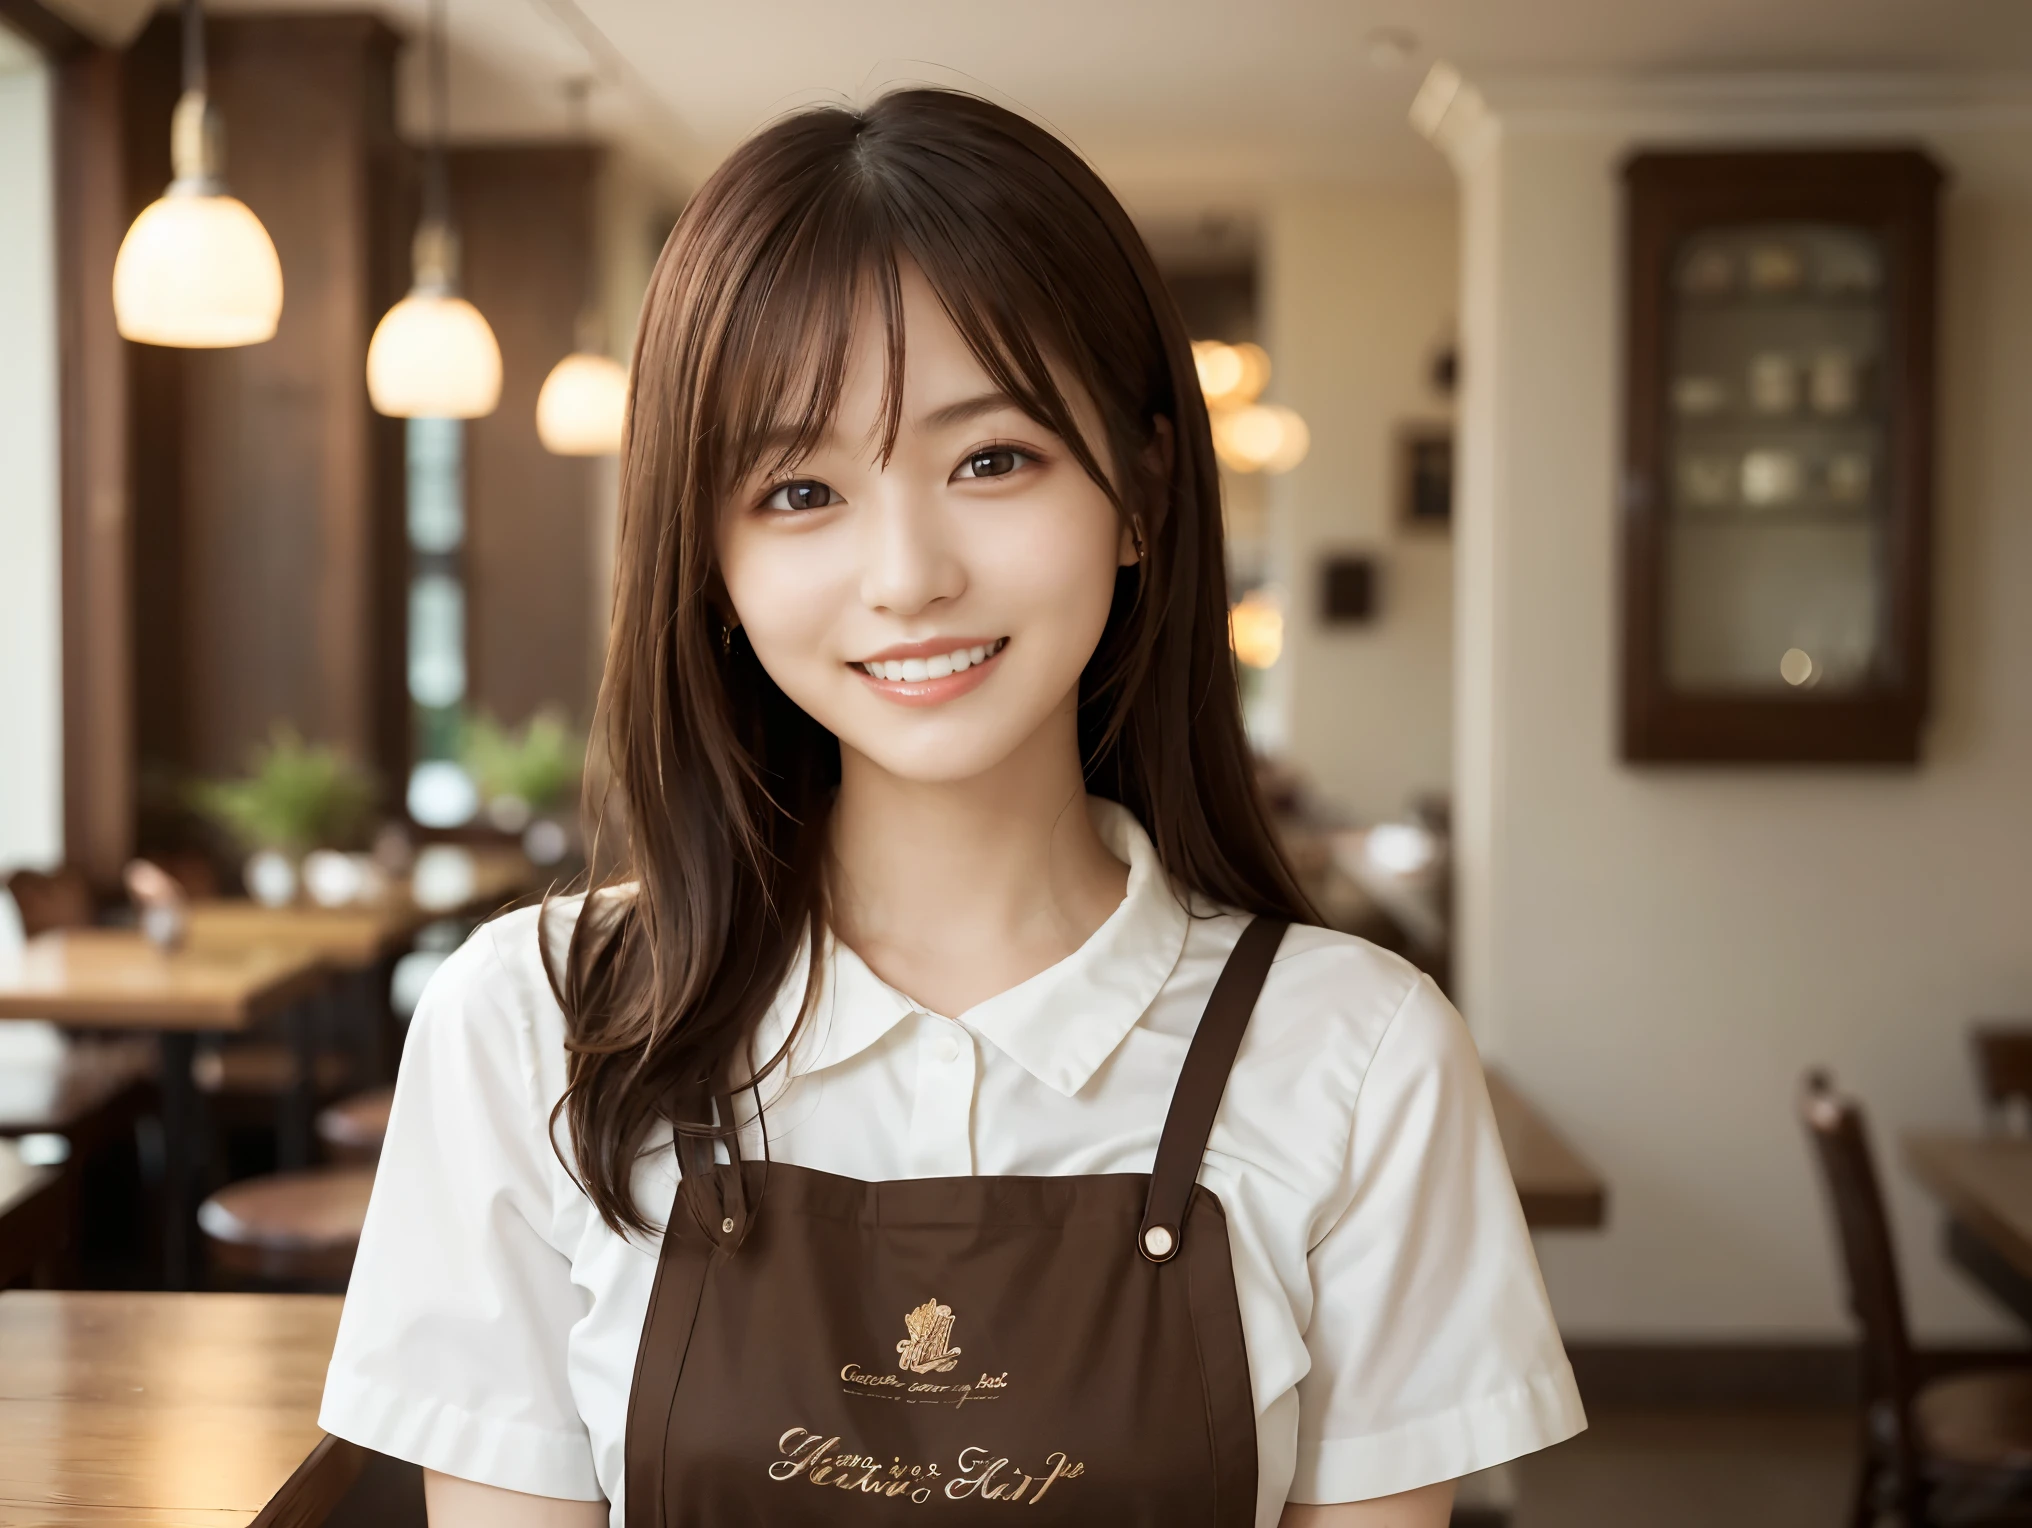 (highest quality、Tabletop、8k、Best image quality、Award-winning works)、Woman working in a café、(The perfect brown apron:1.2)、(Standing elegantly in a cafe:1.1)、(A classy shirt and apron:1.1)、(Big Breasts:1.1)、(Accentuate your body lines:1.1)、Beautiful woman portrait、The most elegant and cozy cafe、The most natural cafe, Perfectly organized、(The moodiest warm lighting:1.1)、(The most romantic atmosphere:1.1)、Stylish and elegant cafe、Strongly blurred background、Look at me and smile、(Accurate anatomy:1.2)、Ultra high resolution perfect beautiful teeth、Ultra-high definition beauty face、Ultra HD Hair、Ultra HD The Shining Eyes、The Shining, Super high quality beautiful skin、Super high quality glossy lip